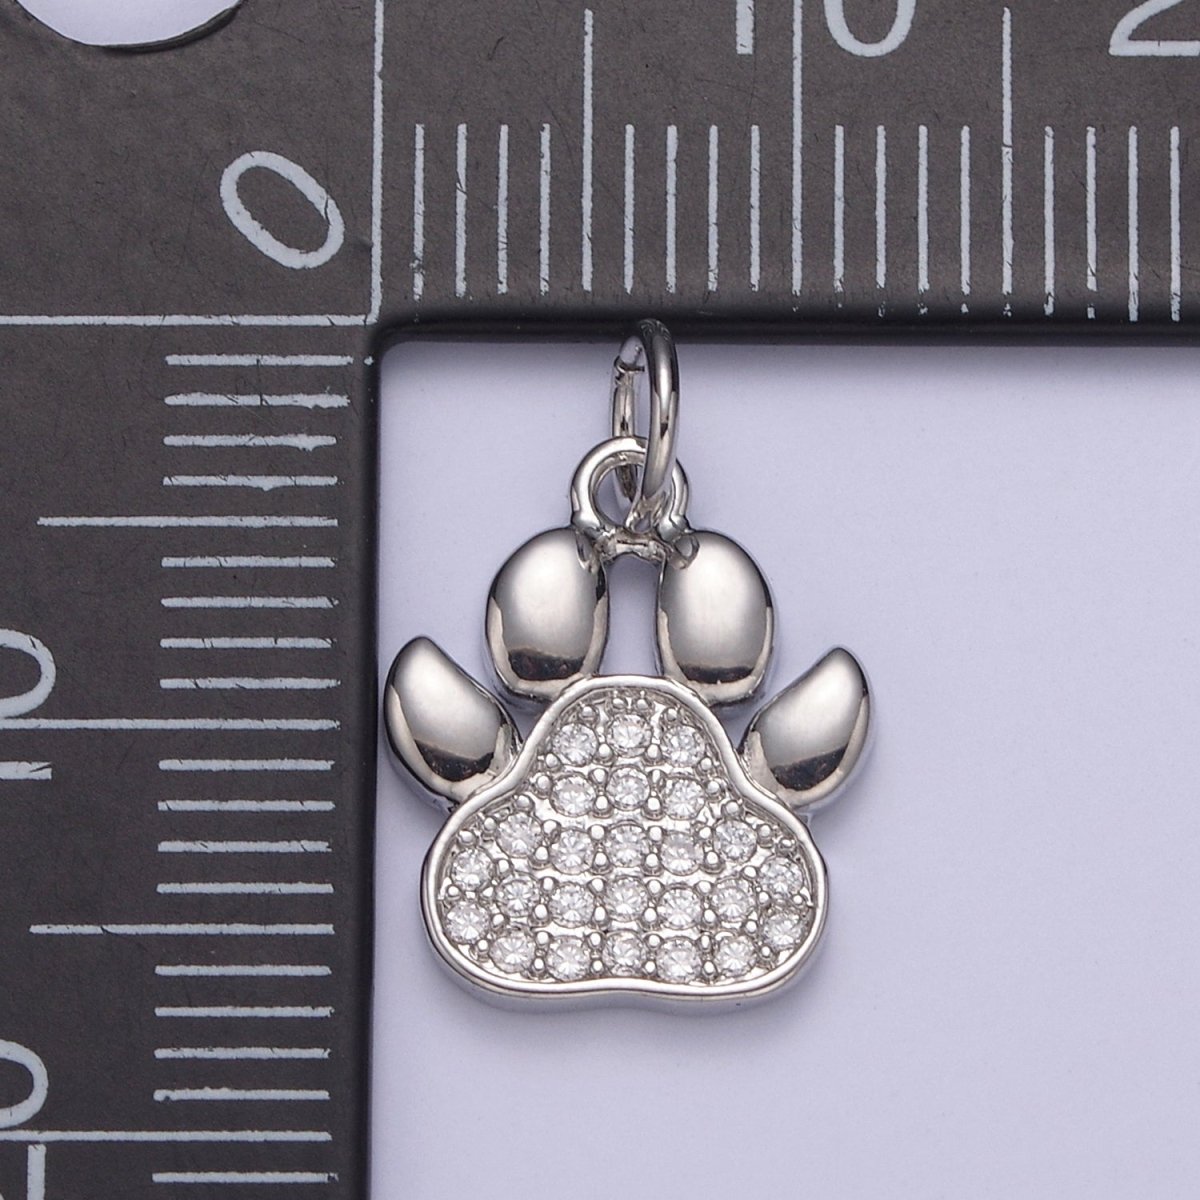 Dog Cat Bear Paw Print Charms for Bracelet Necklace Earring CZ Charm Jewelry Making Supply N-685 N-686 - DLUXCA